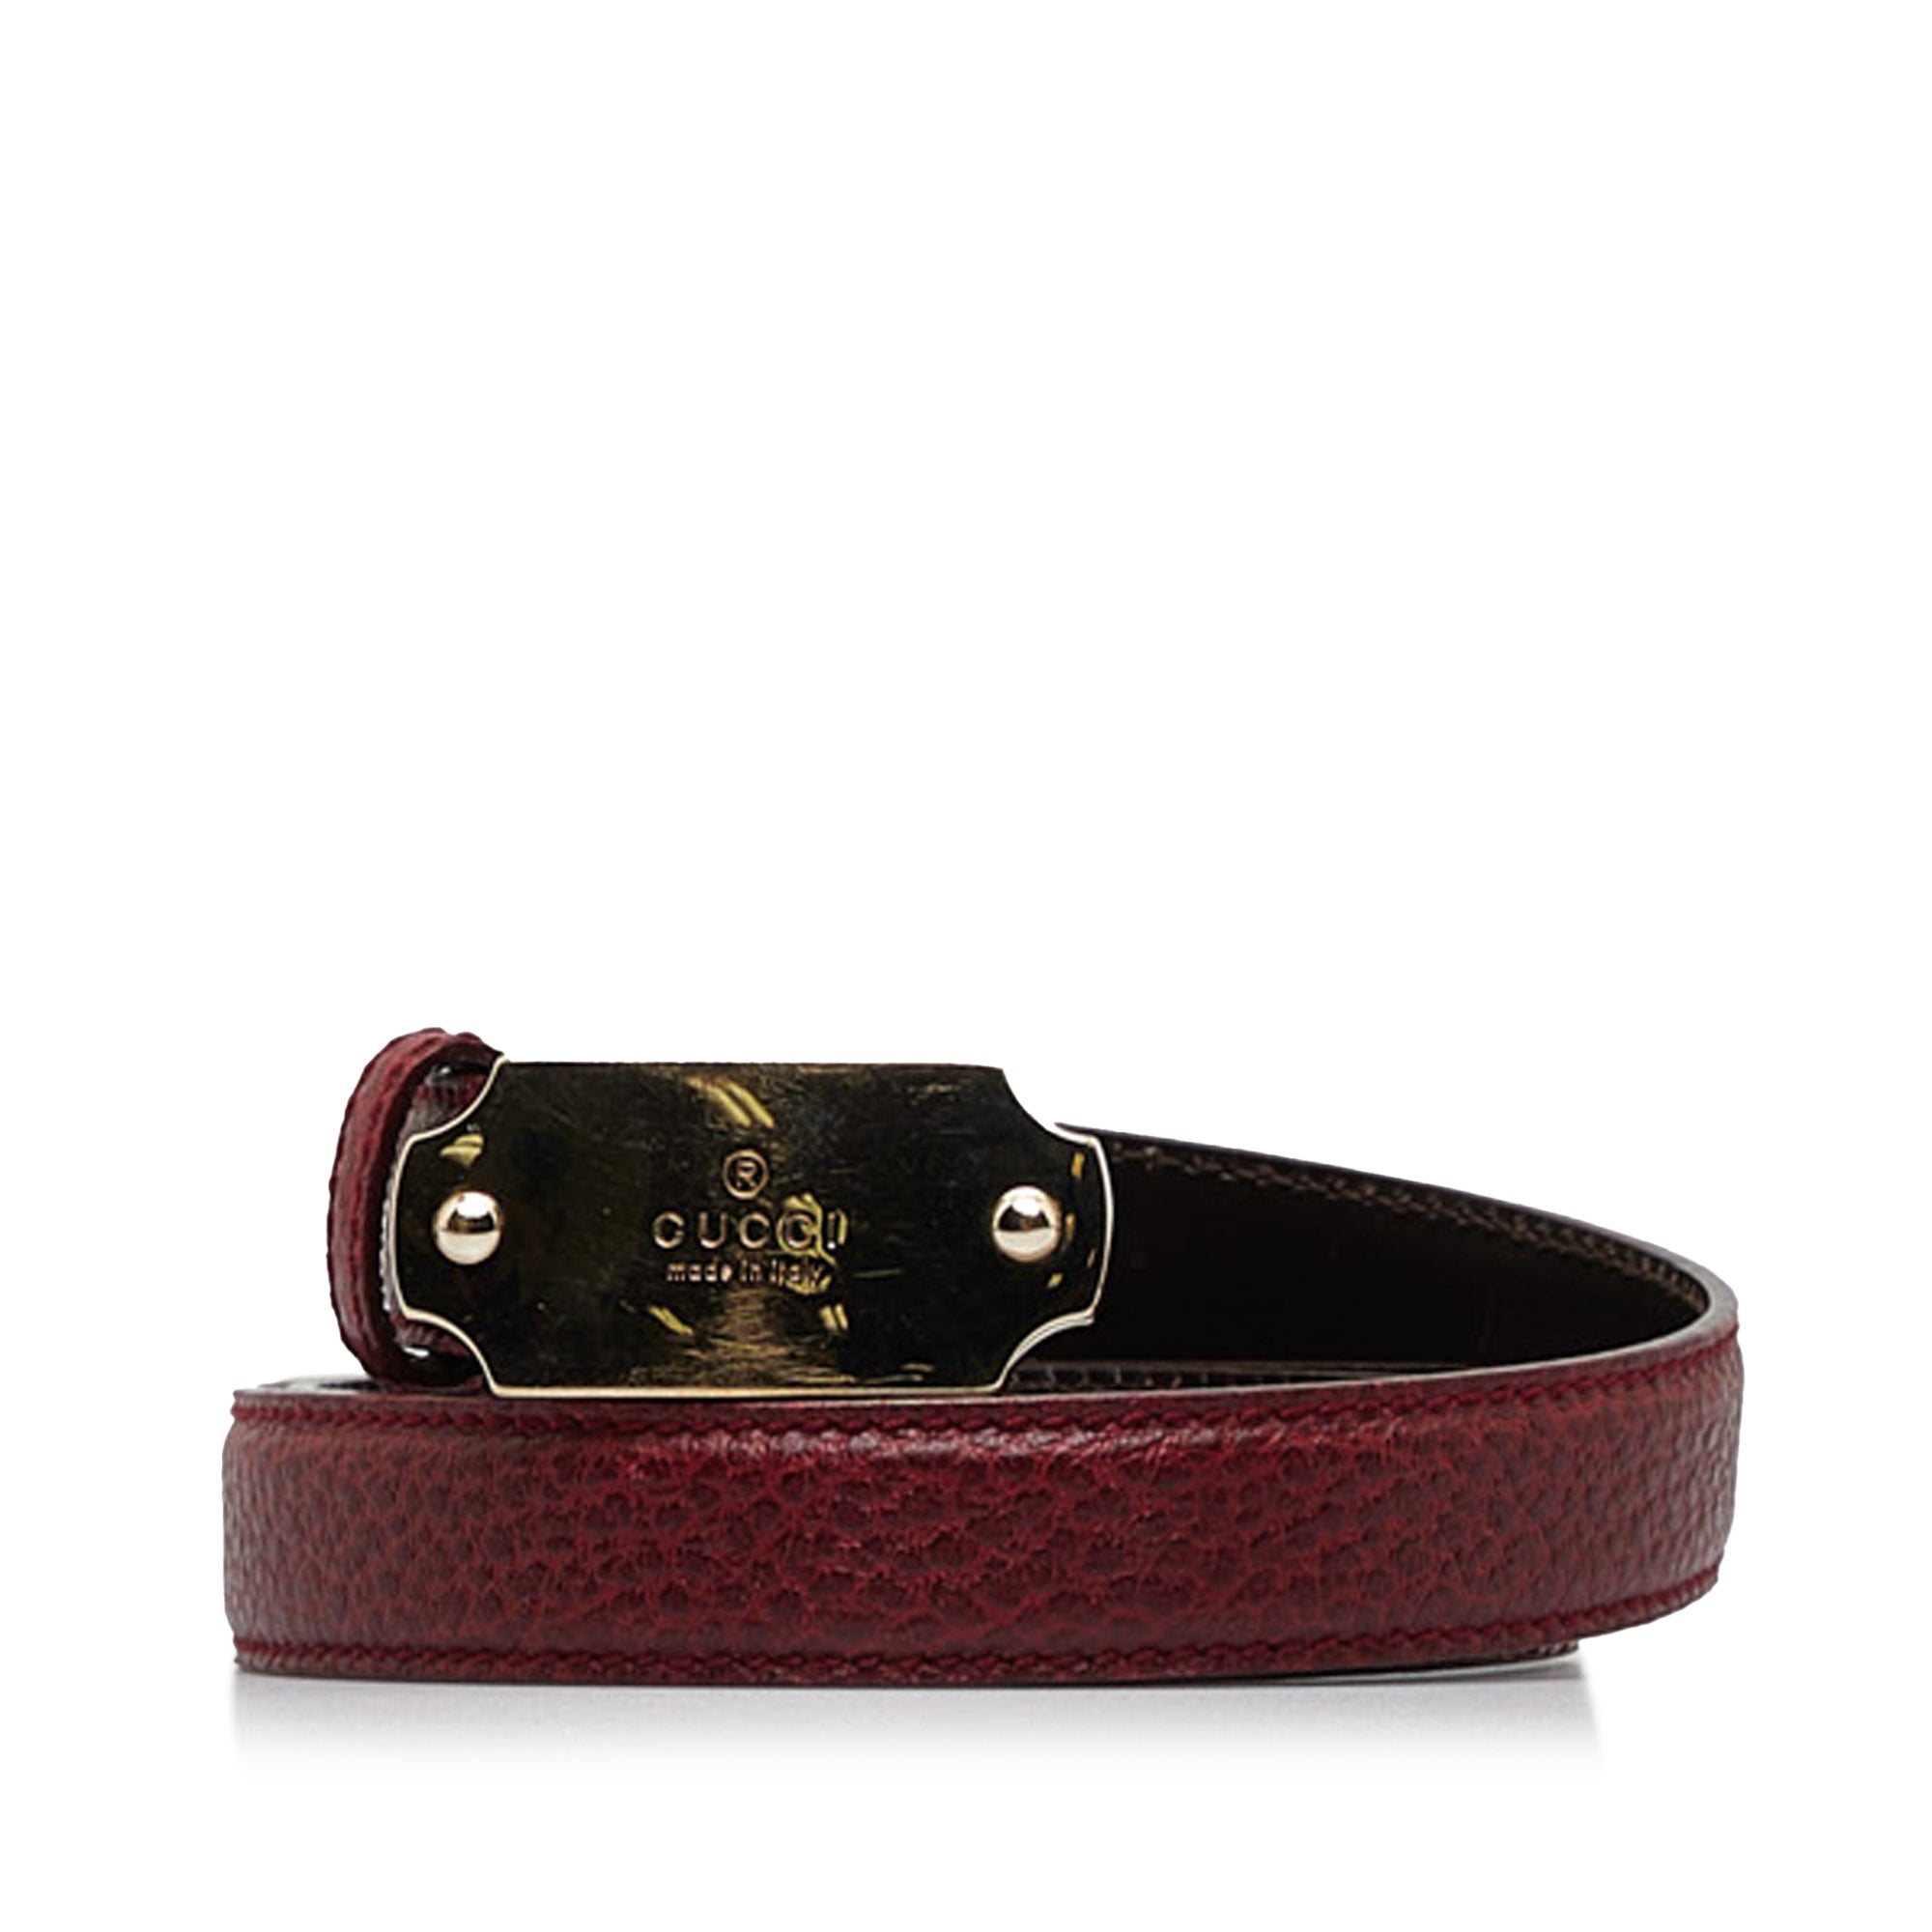 Christian Louboutin Authenticated Leather Belt